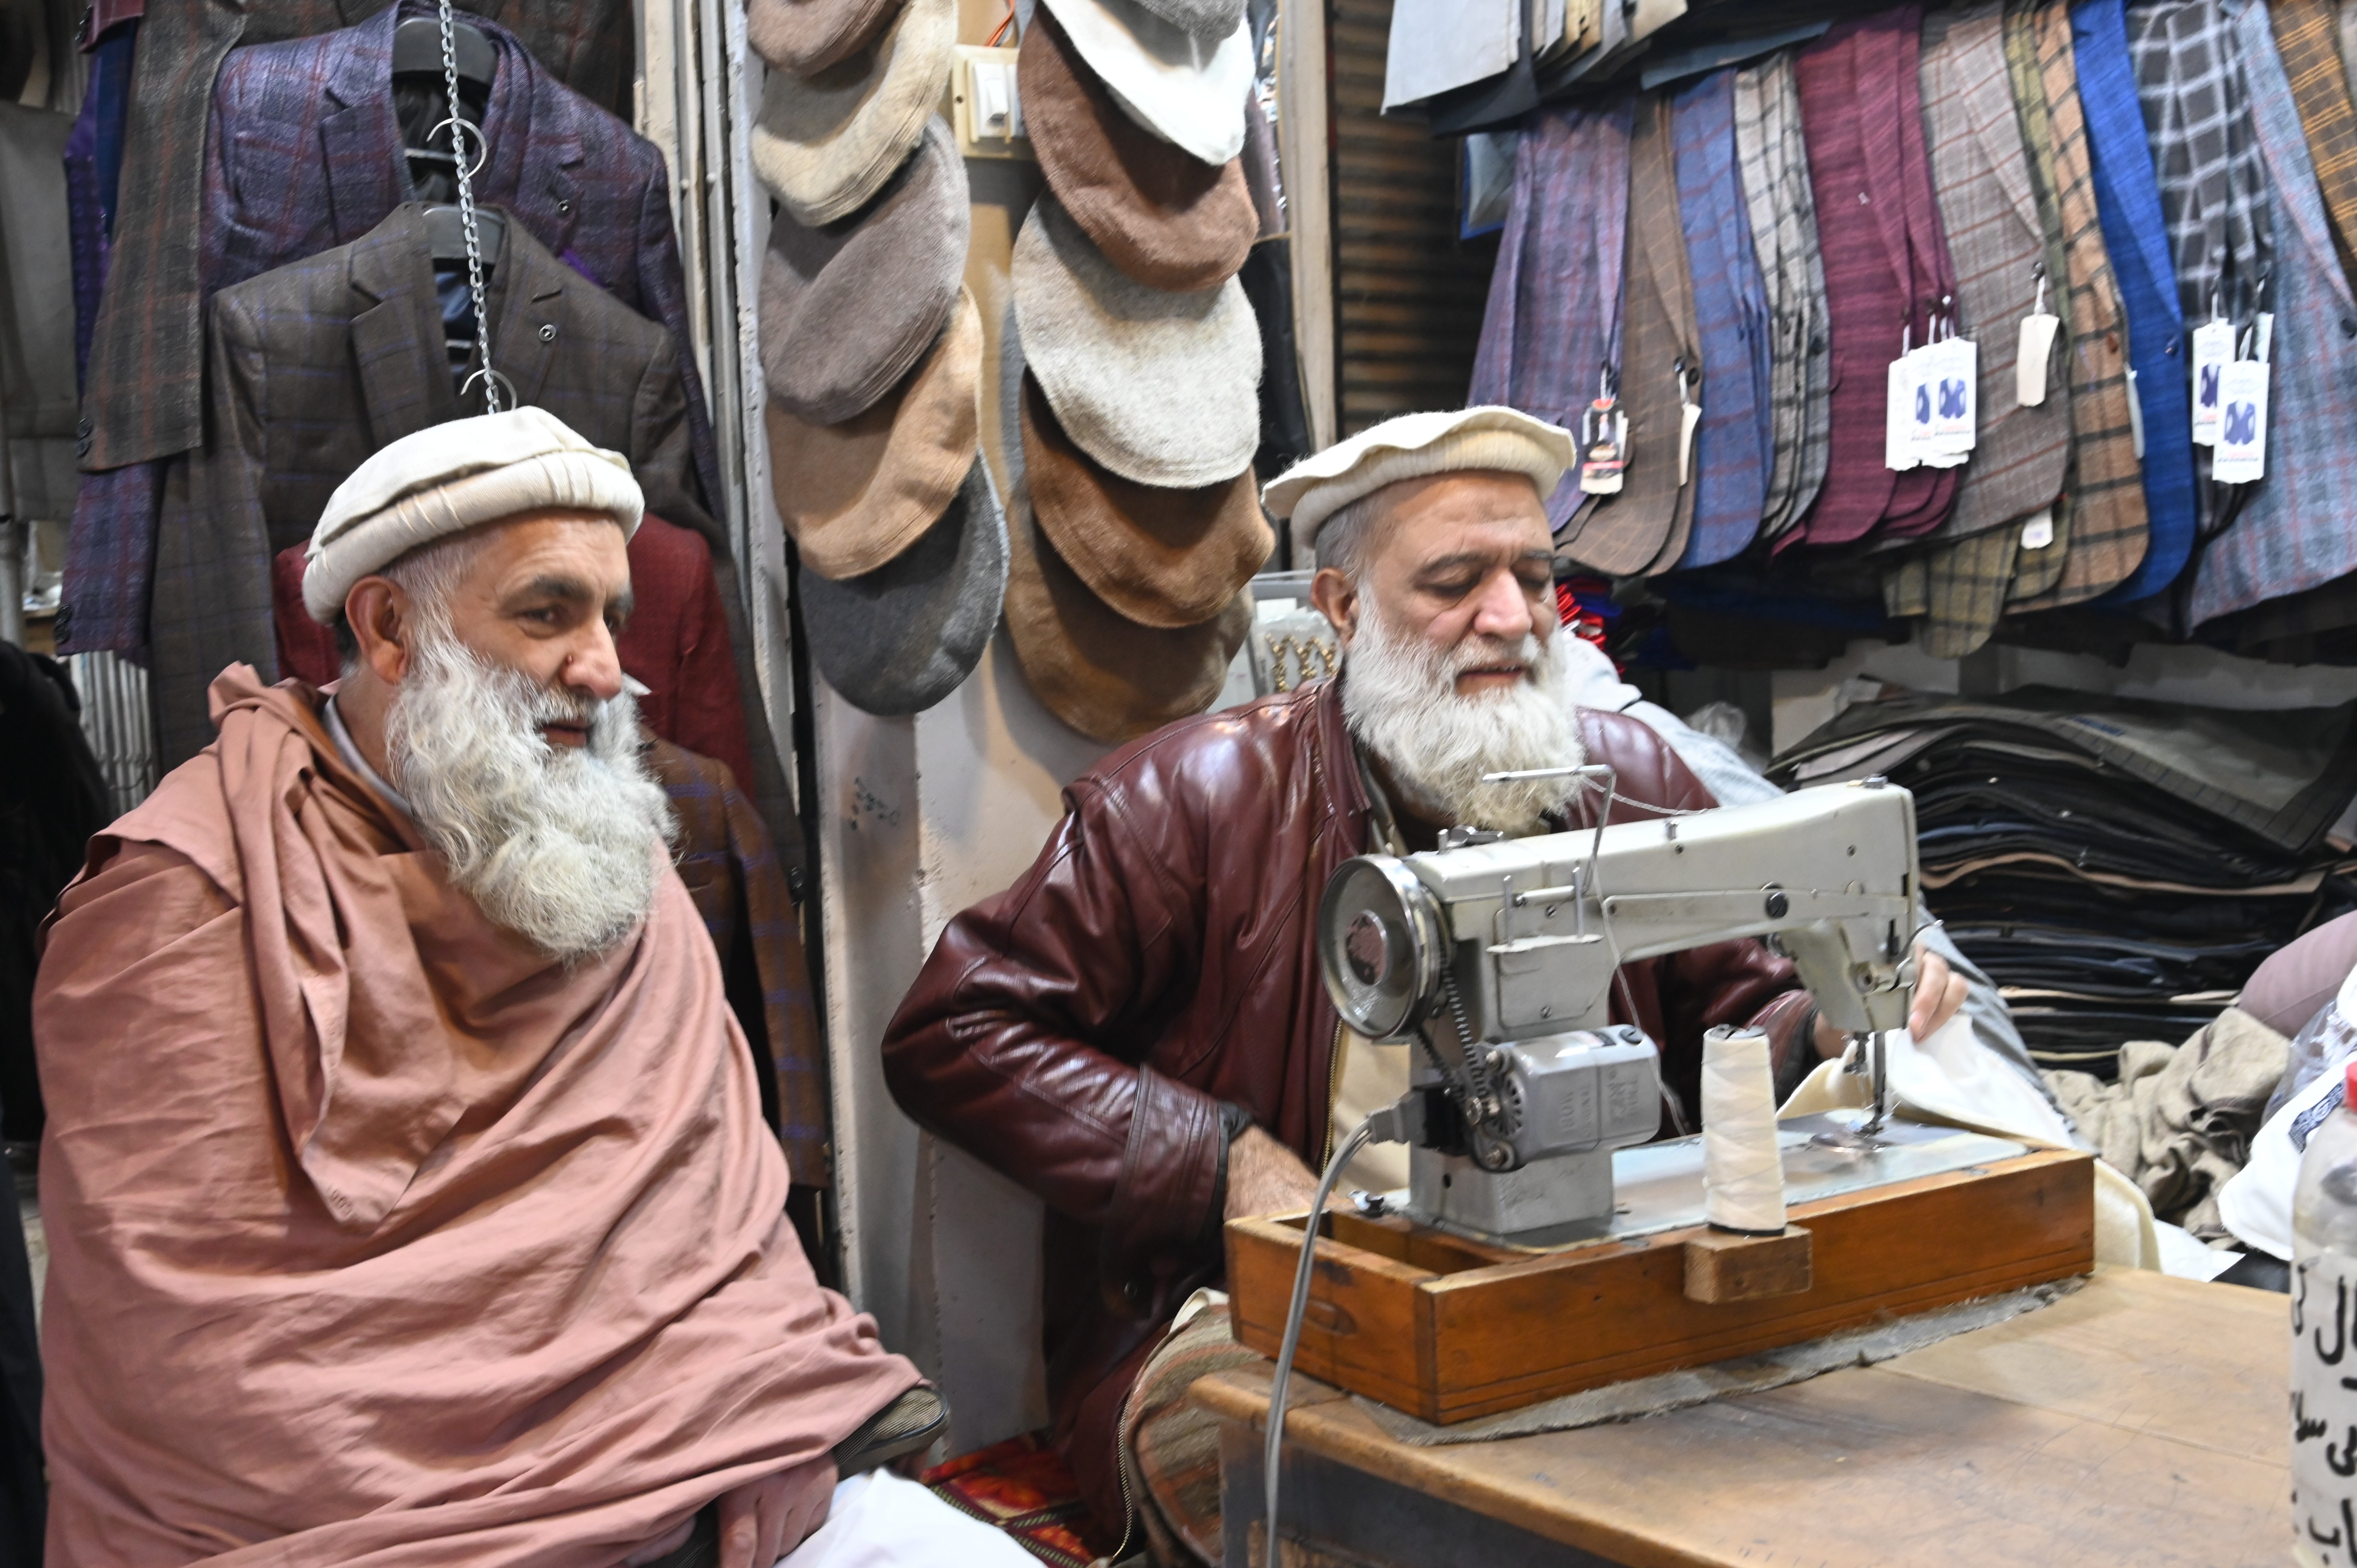 A tailor busy in stitching the warm clothes